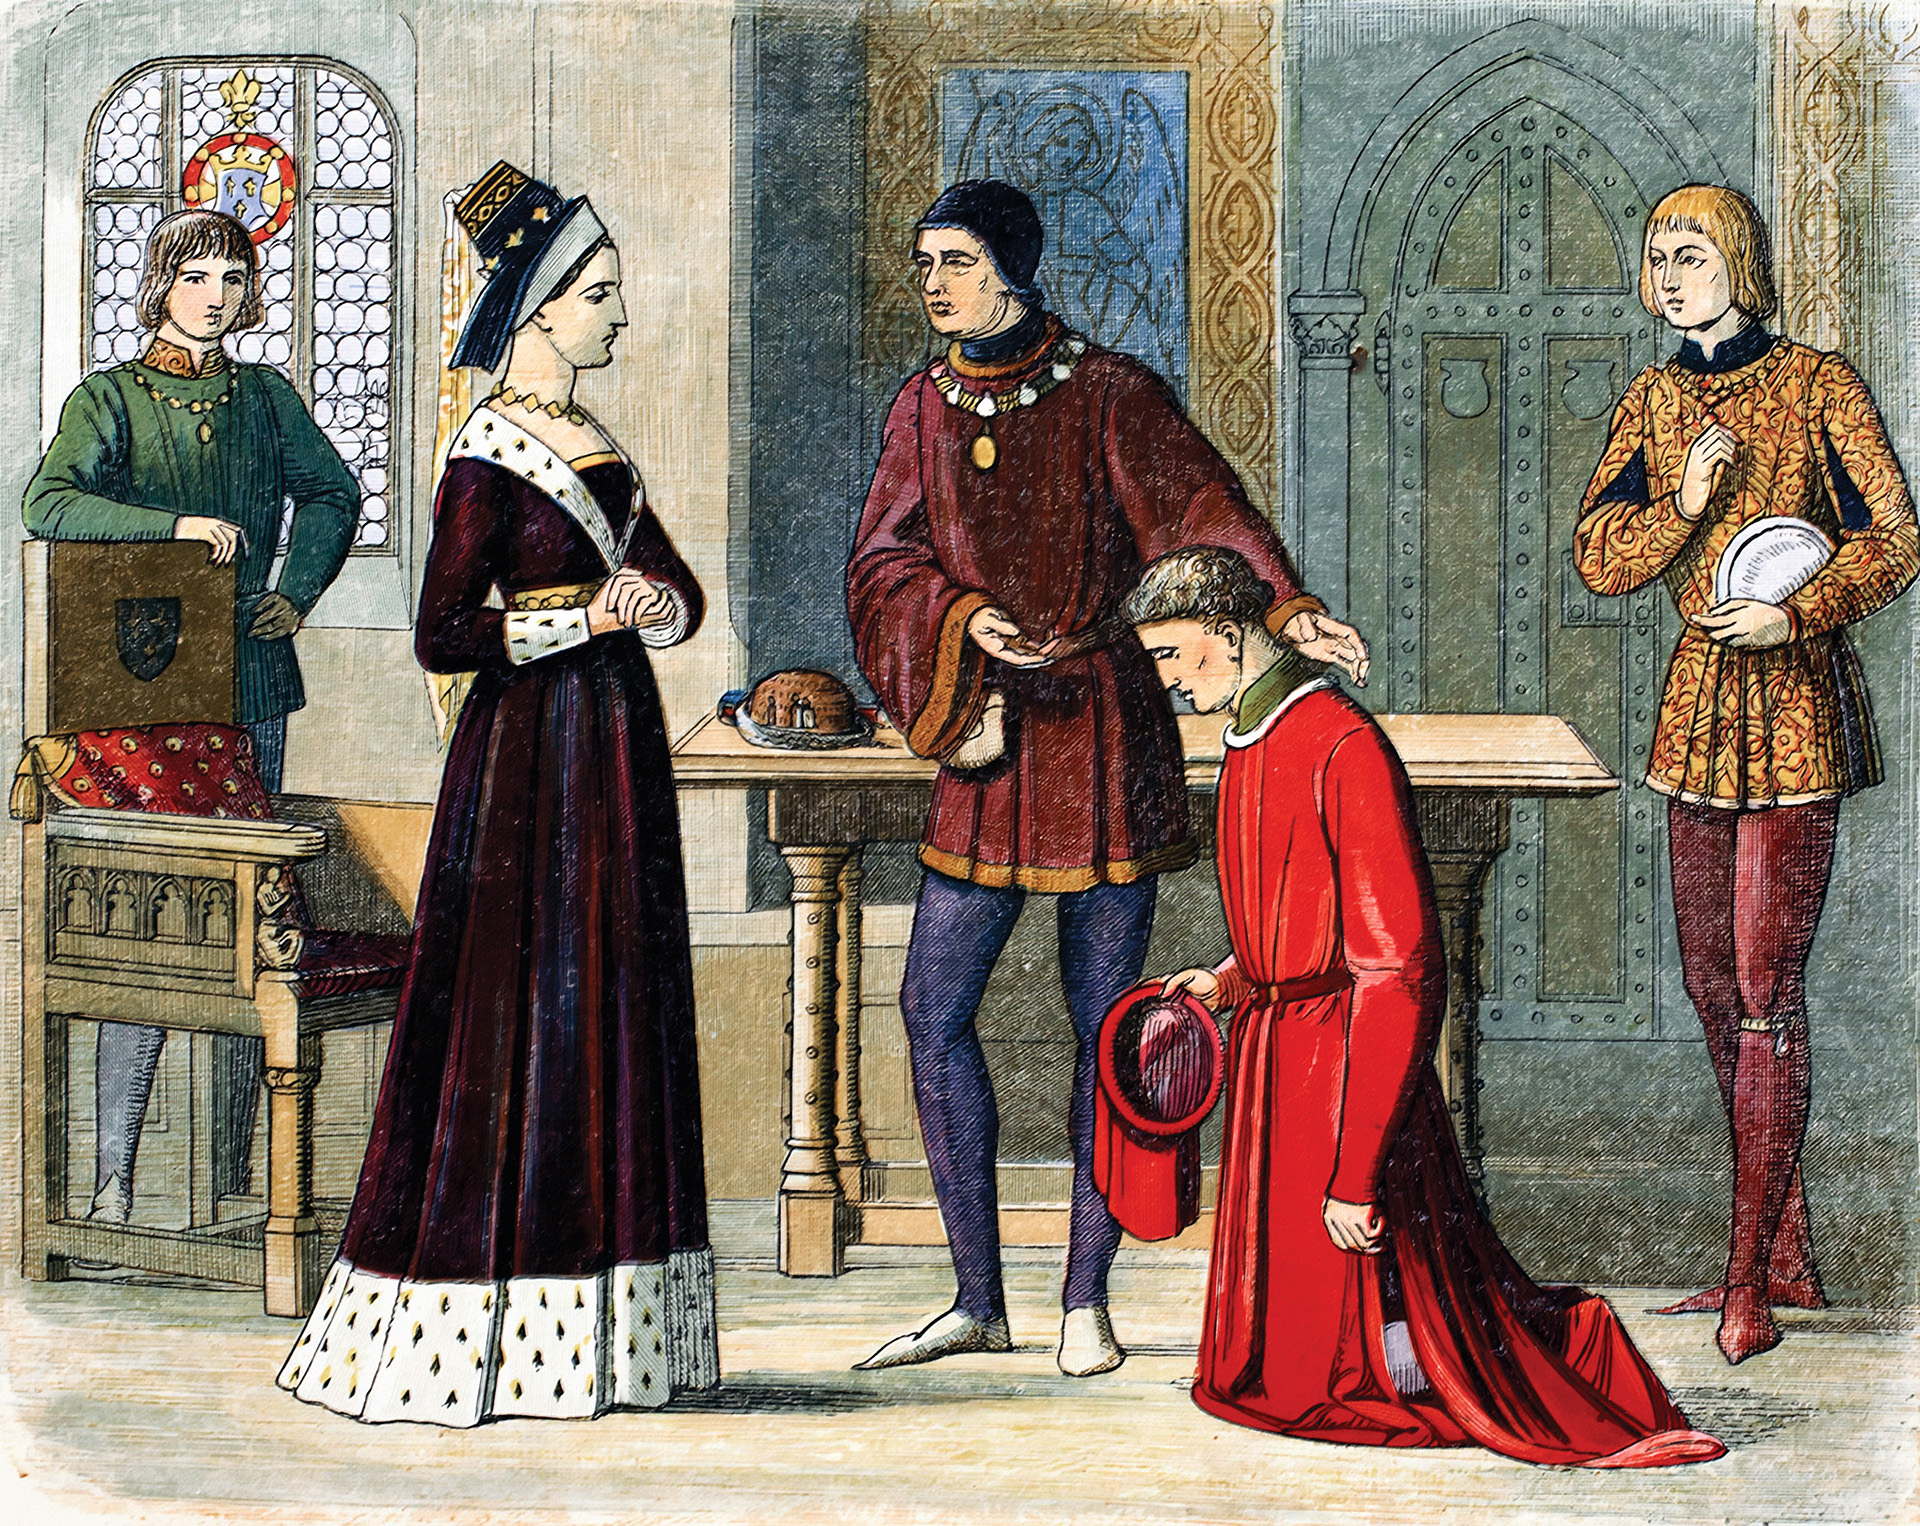 The Earl of Warwick submits to Queen Margaret of Anjou in France at a meeting arranged by French King Louis XI. Through the Angers Agreement of July 1470, Warwick pledged to restore her husband, deposed Lancastrian King Henry VI, to the throne of England.